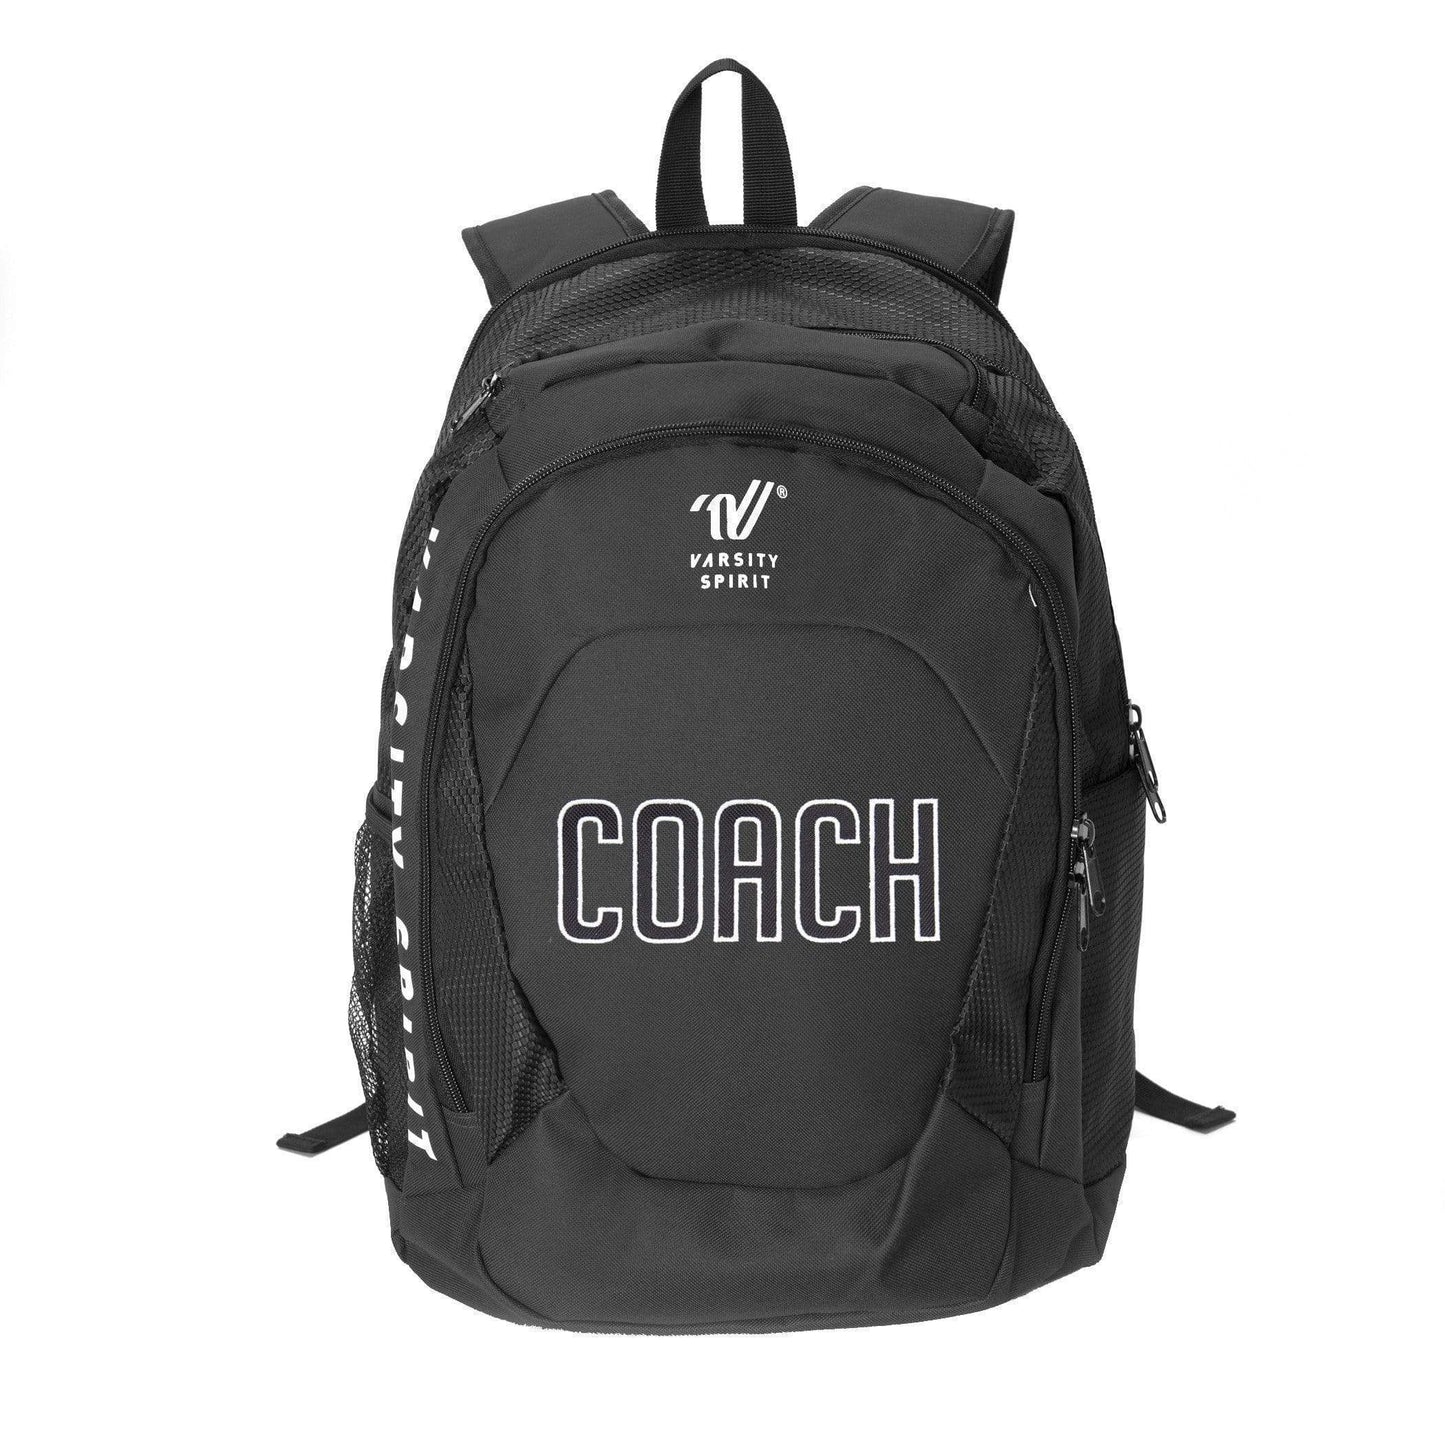 Load image into Gallery viewer, Coach Spirit Backpack VBP15CP
